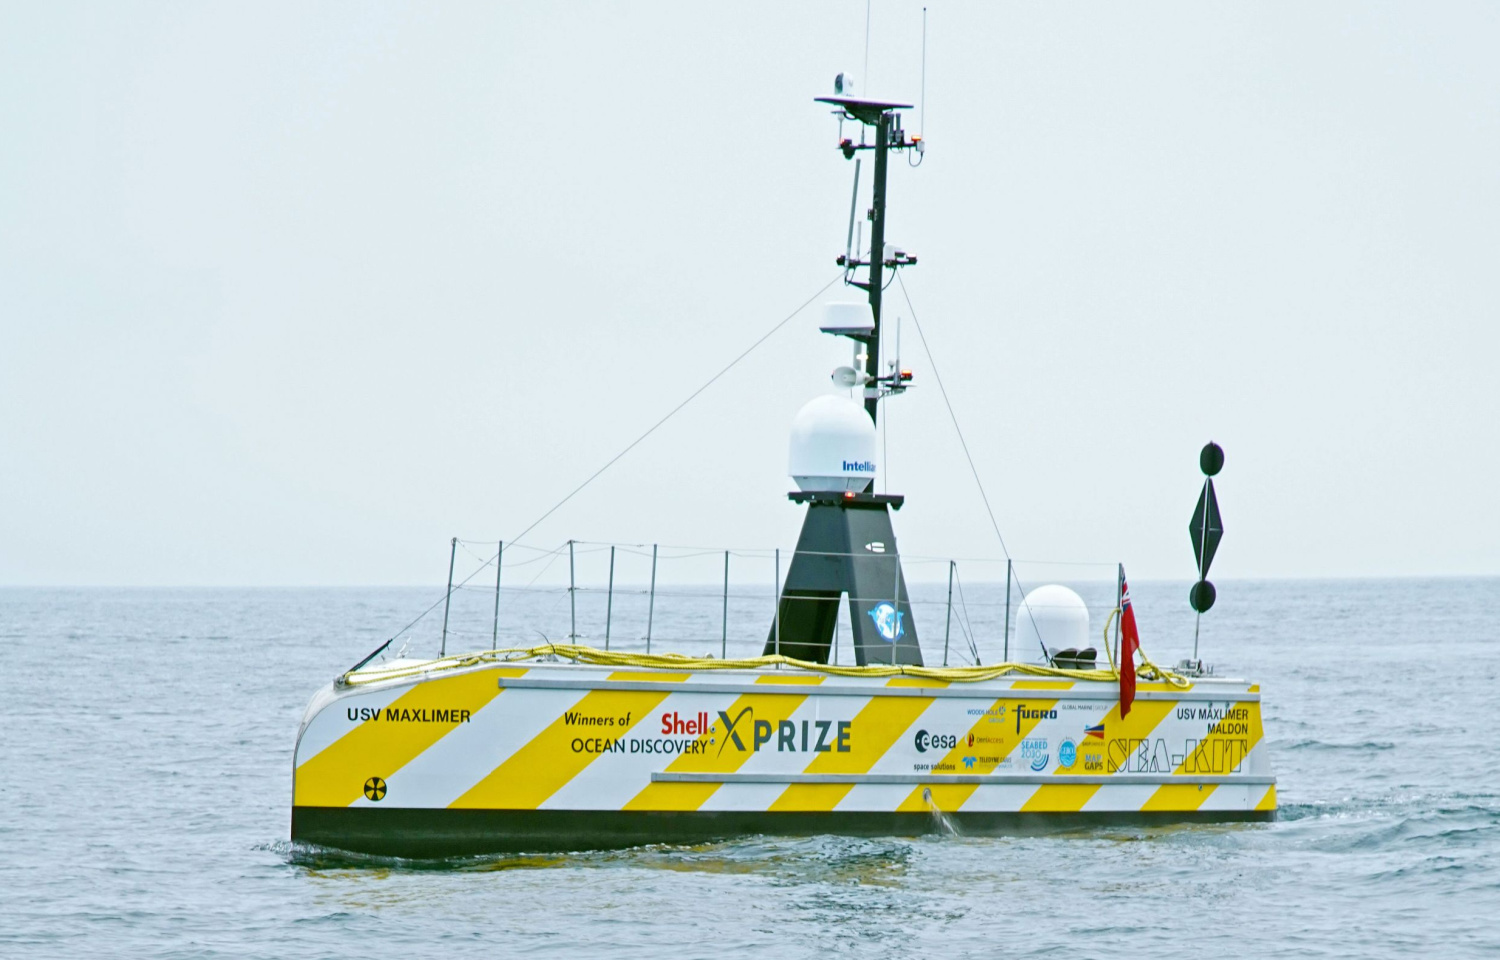 SEA-KIT Unmanned Surface Vehicle